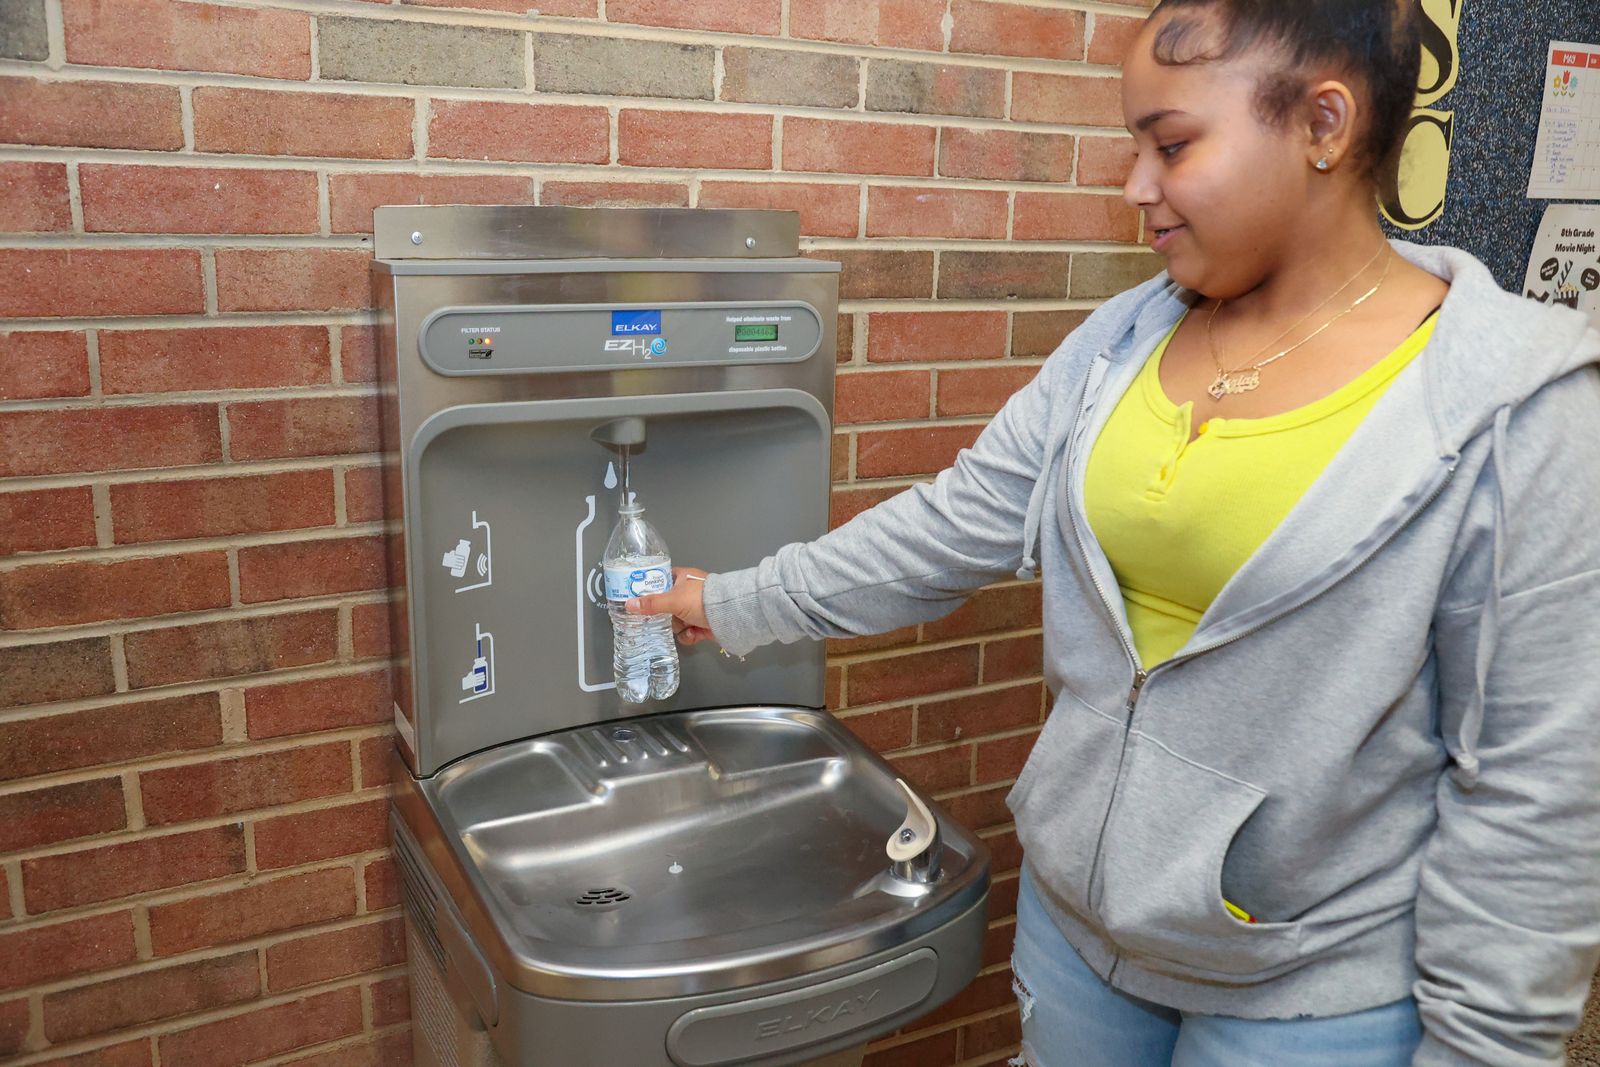 A student stands near a water fountain that has a spout for water bottles. The student is filling a bottle with water. The fountain i against a brick wall.